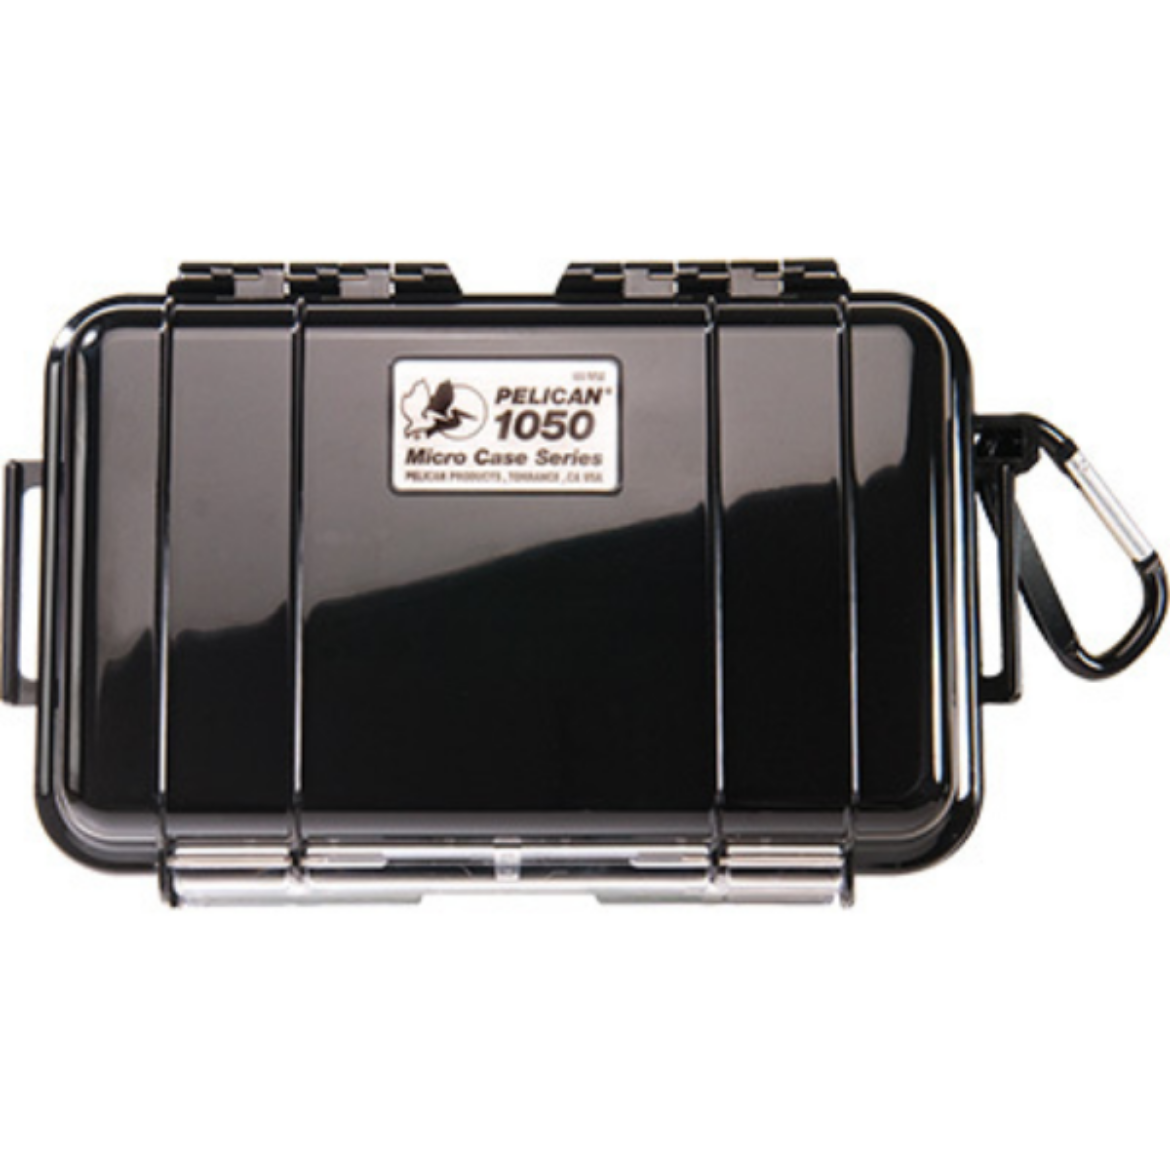 Picture of # 1050 MICRO PELICAN CASE - BLACK WITH BLACK